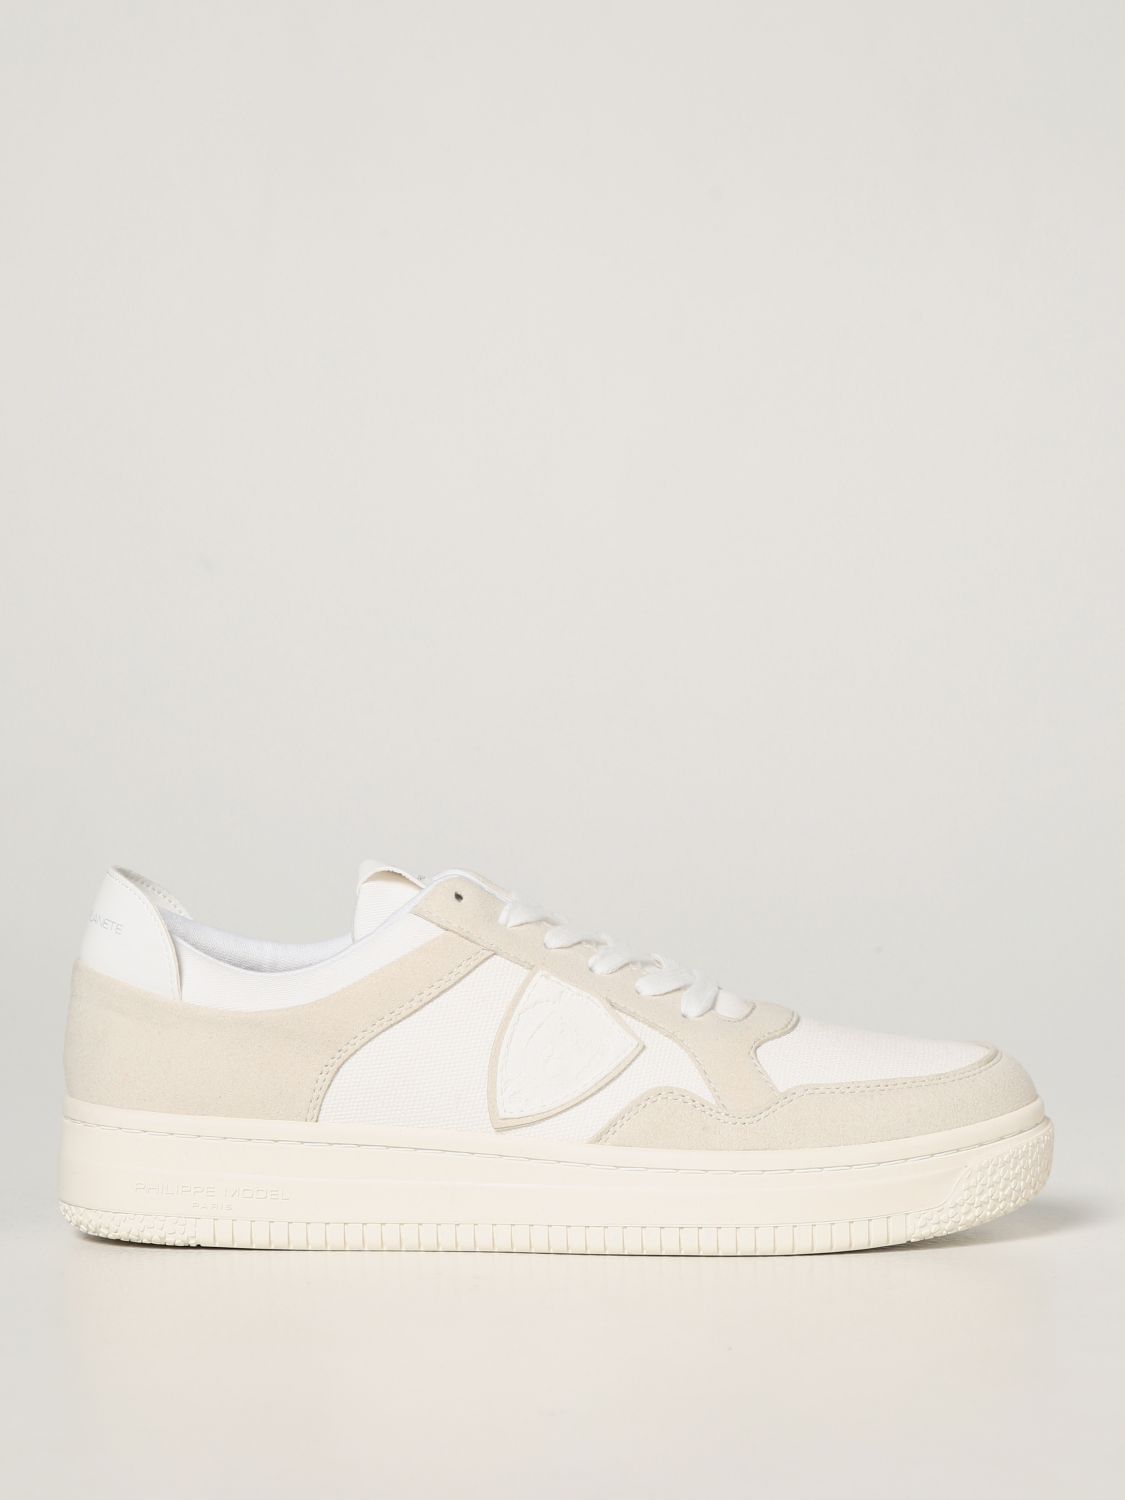 Trainers Acbc X Philippe Model: Trainers men Acbc X Philippe Model beige 1